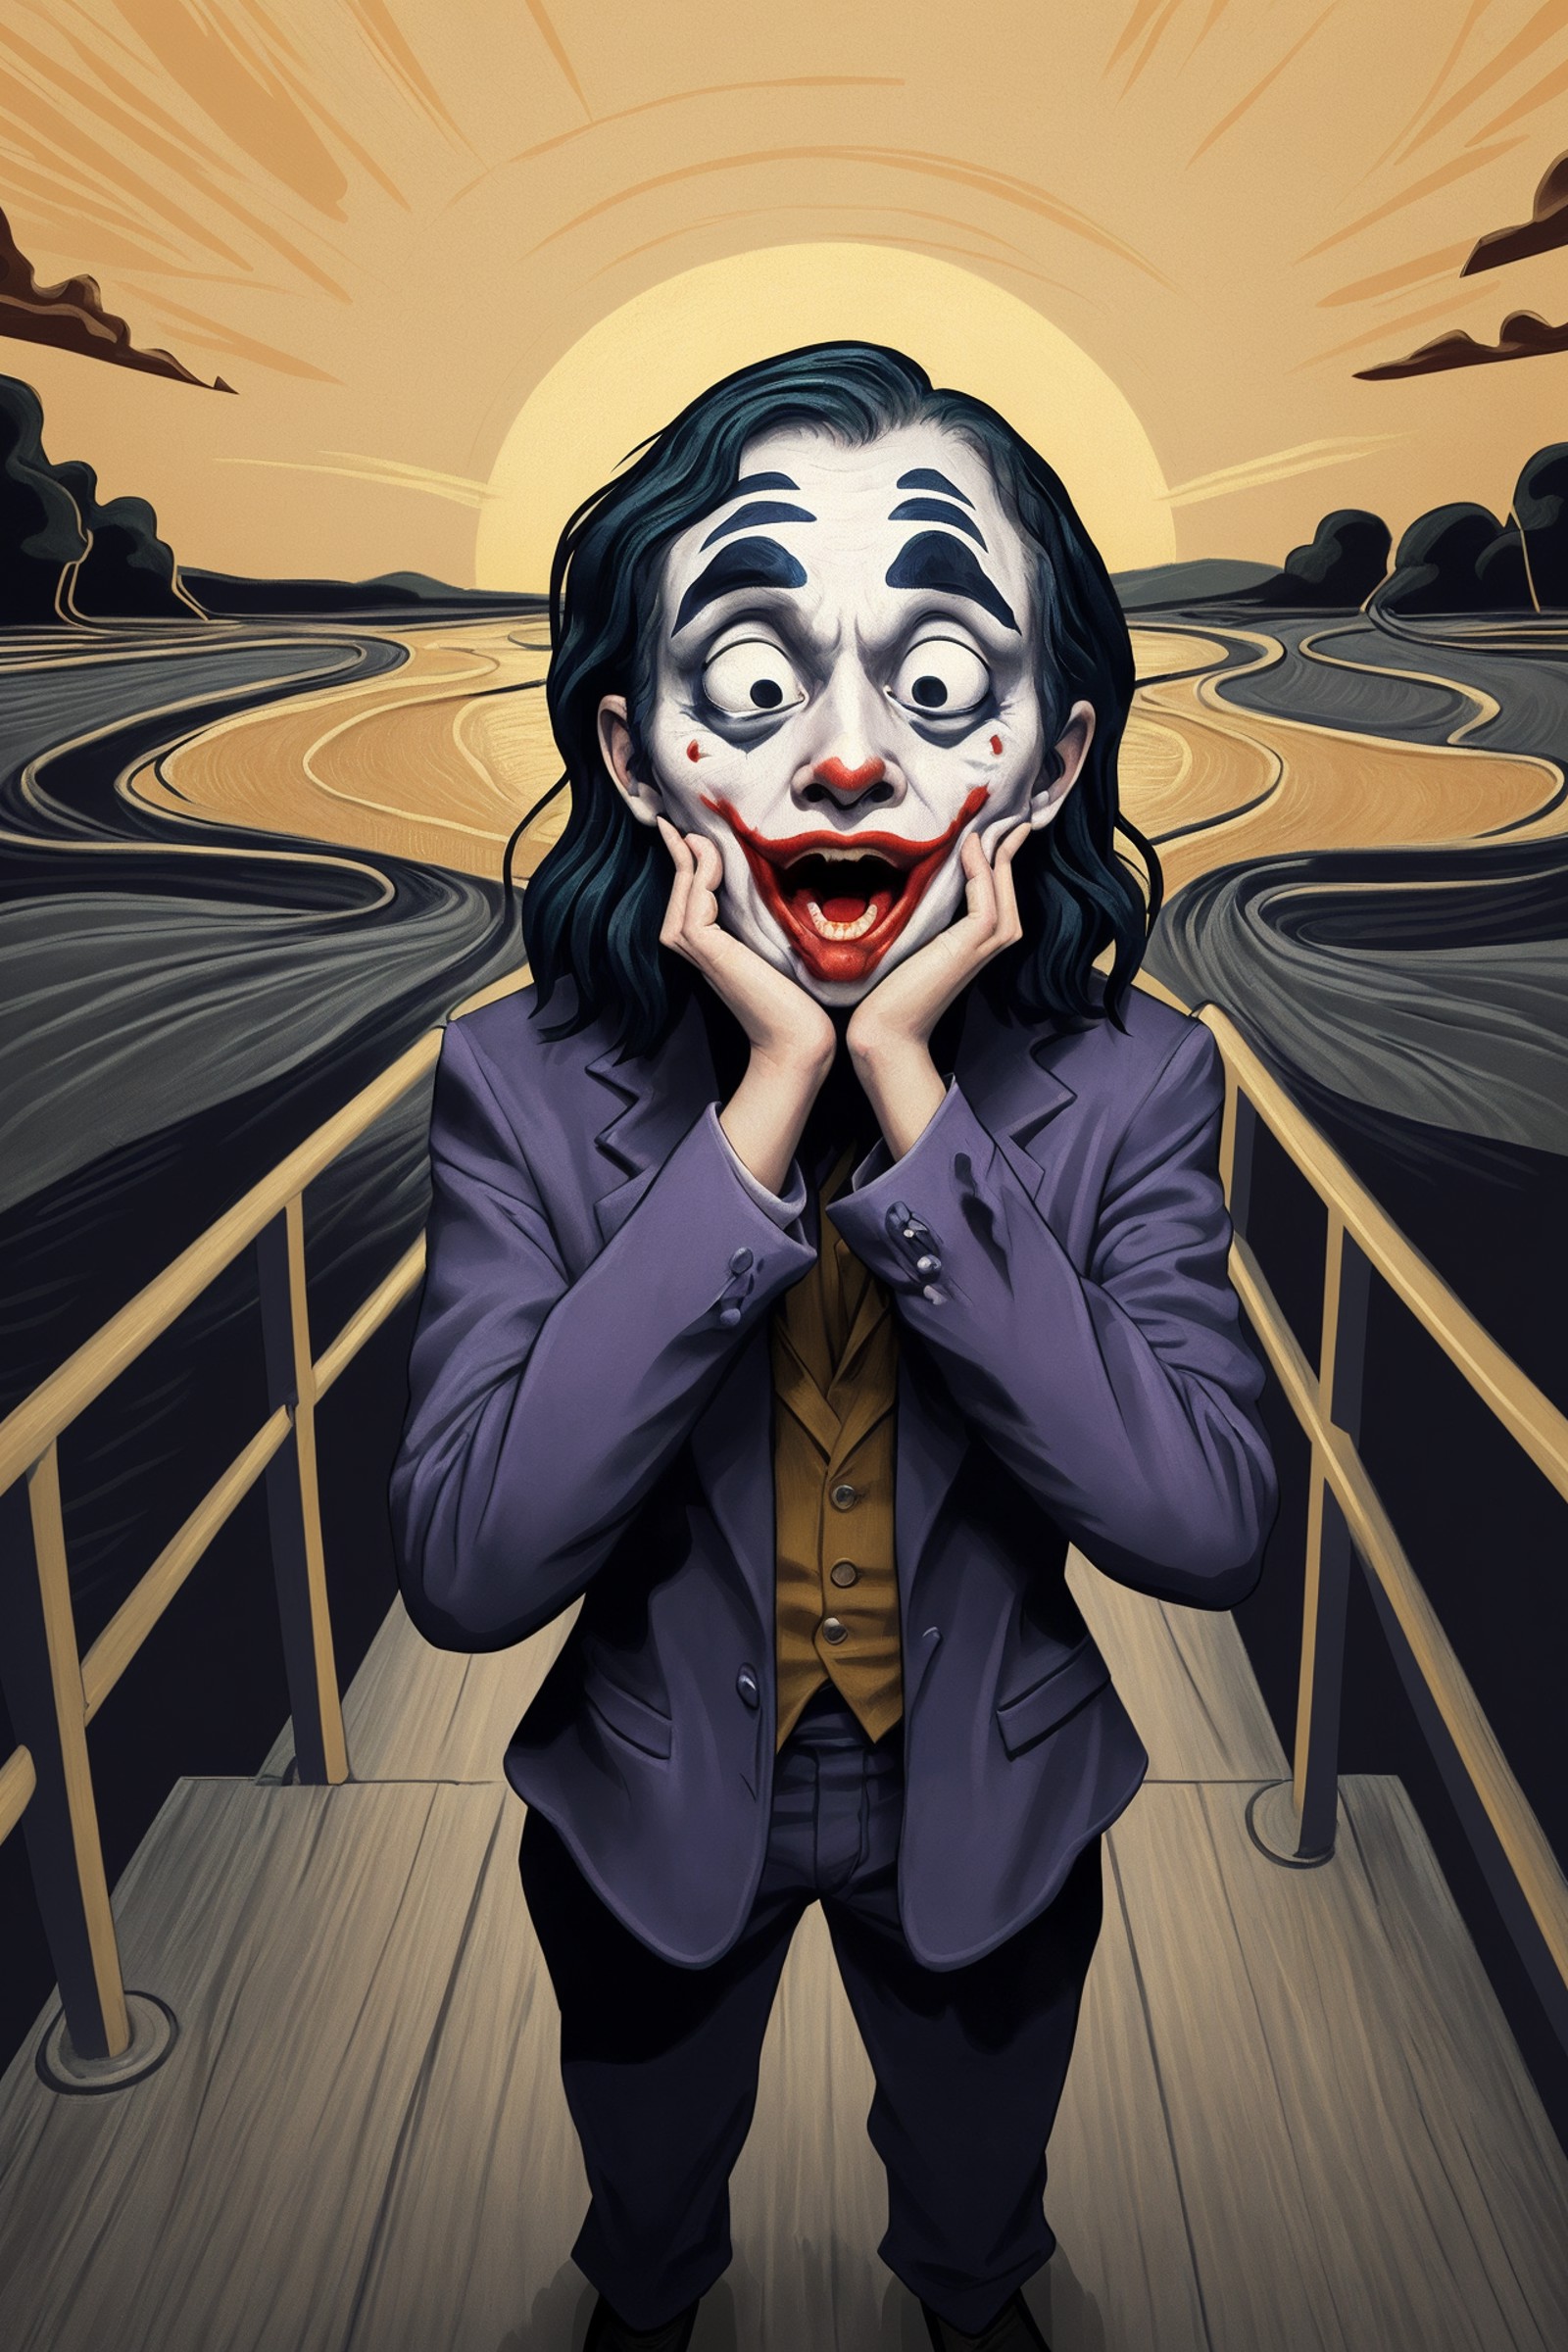 masterpiece,best quality,Ultra HD,extremely detailed cg,flat 2d vector art,
Joker\(character\) in the picture "the scream"...